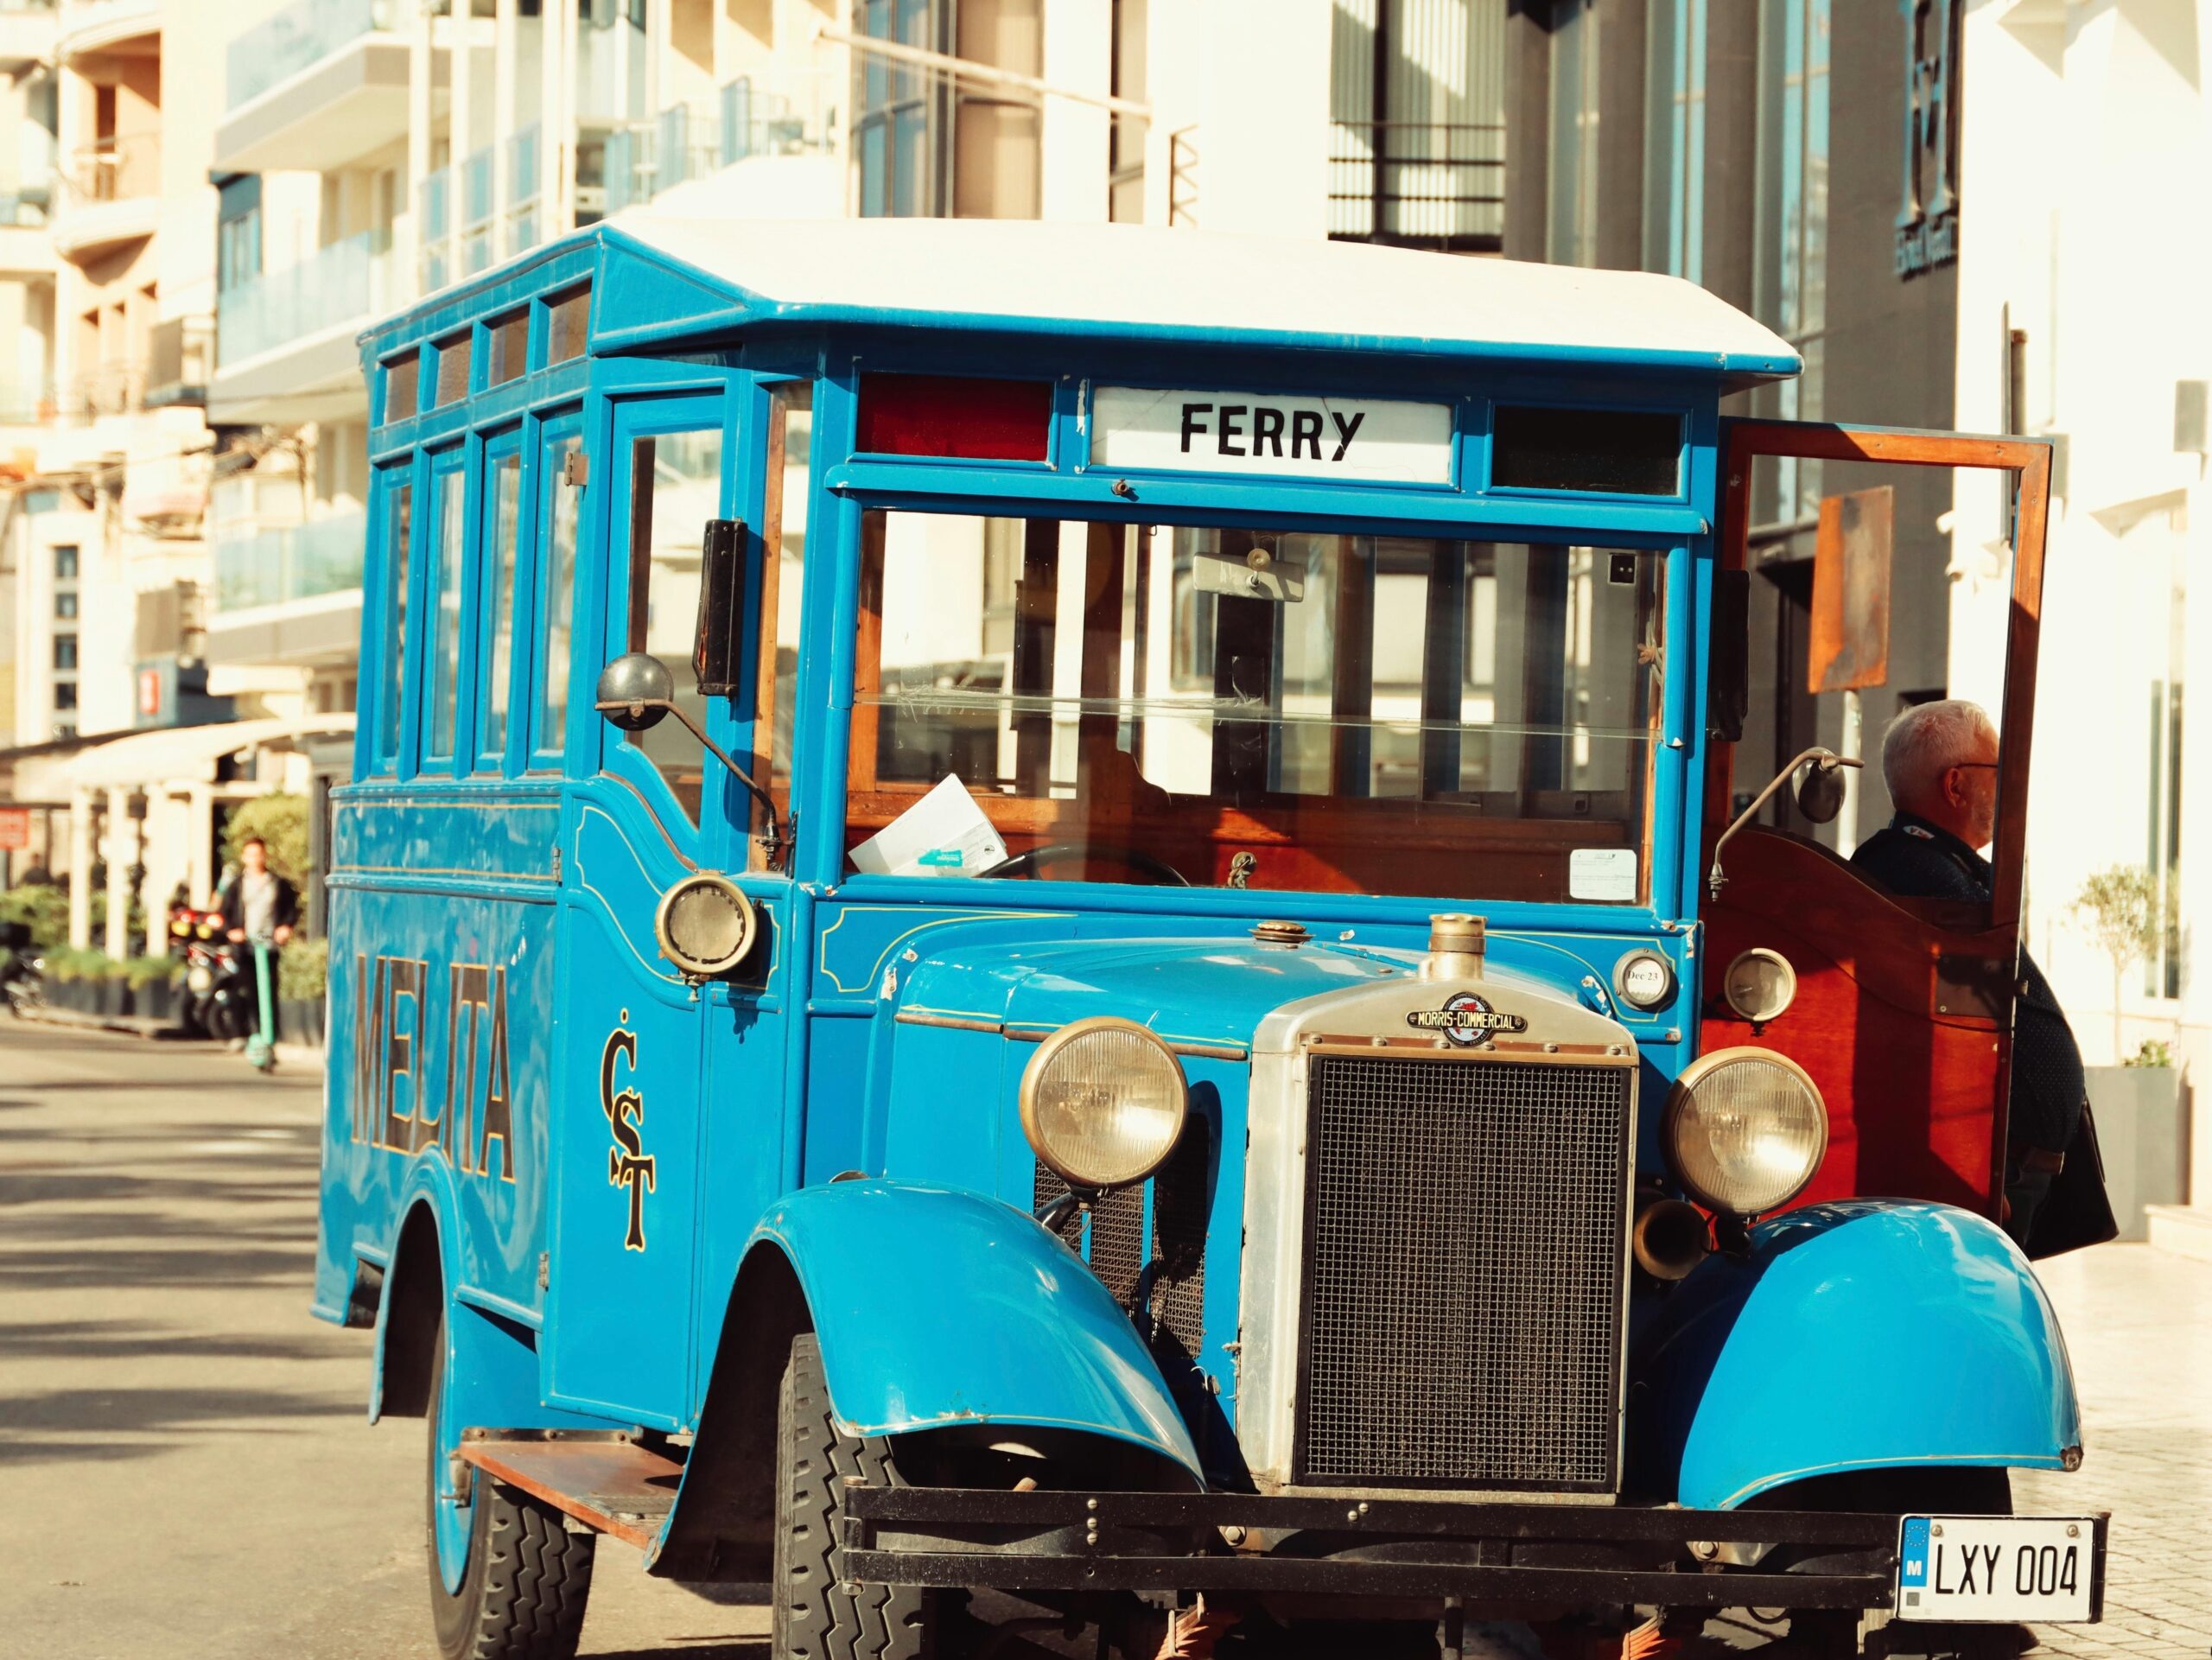 This picture shows an old vintage blue bus in Malta in the middle of the street.